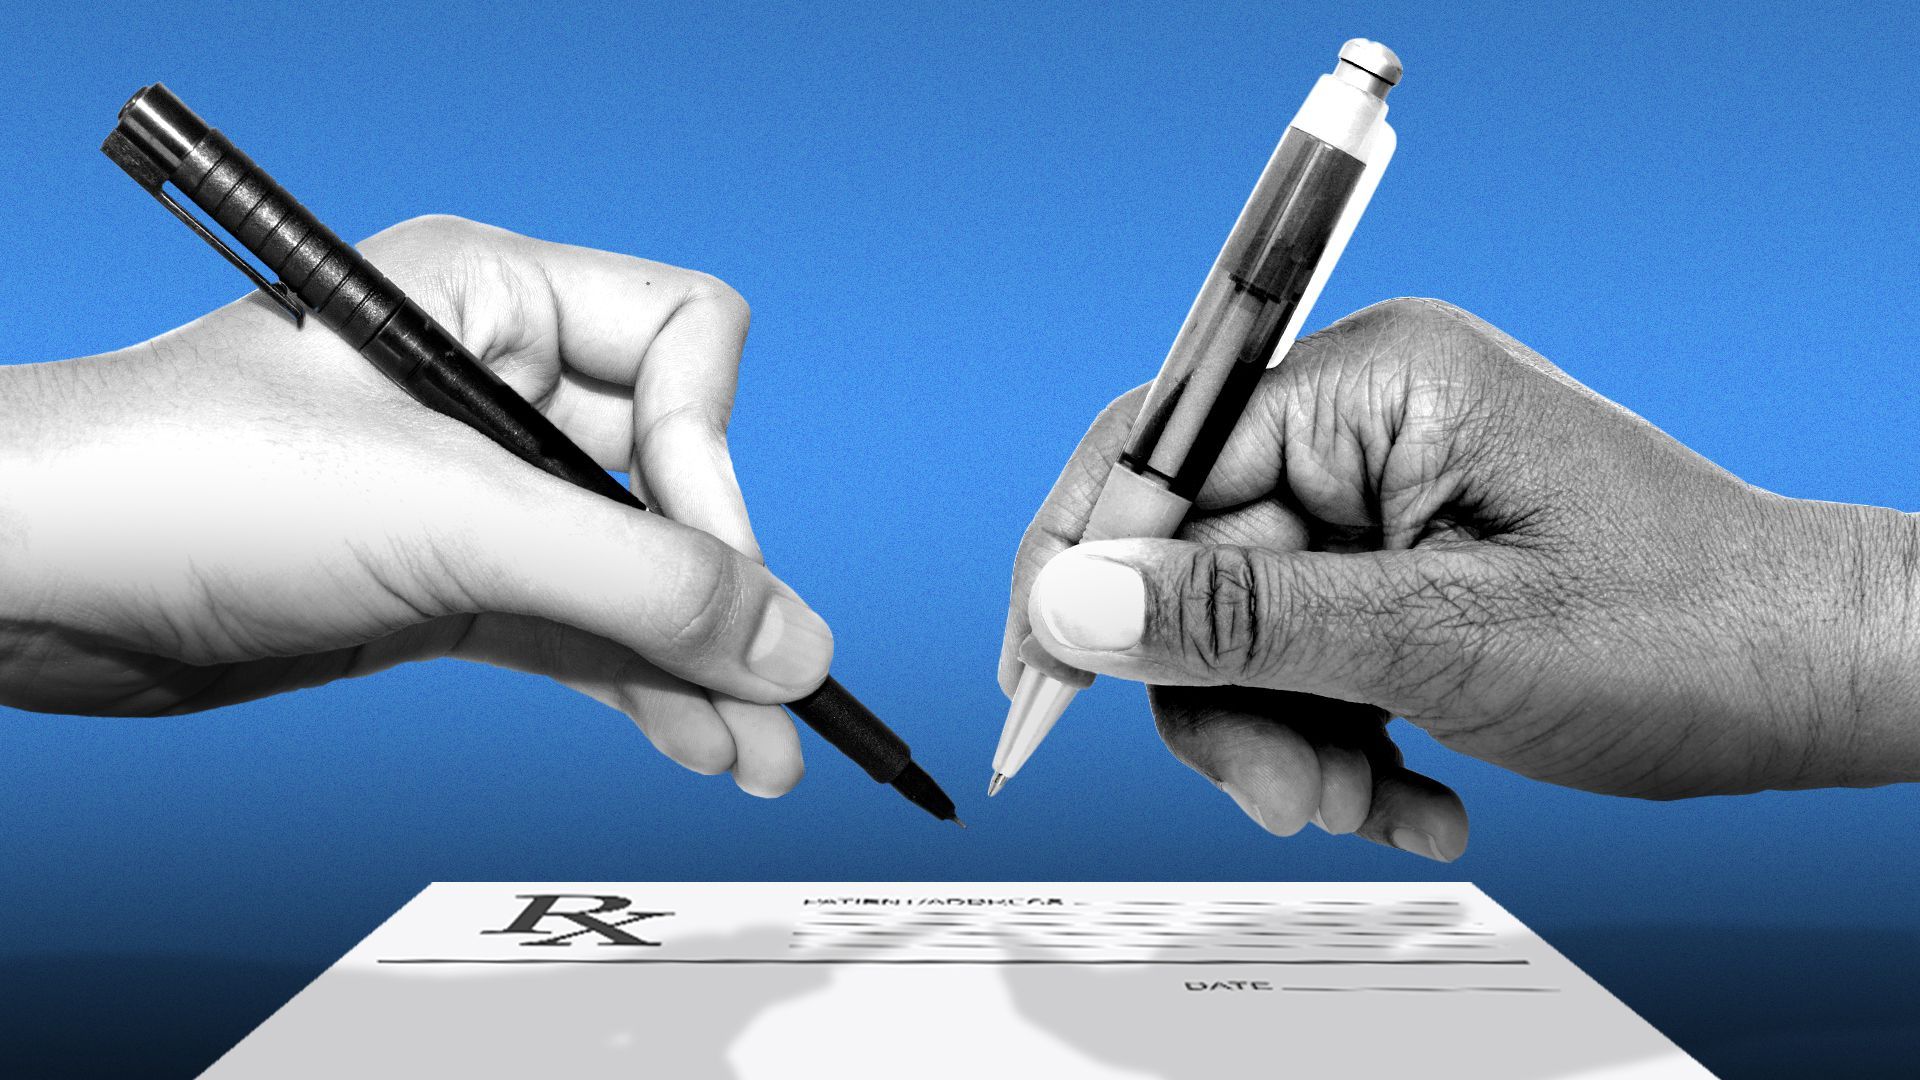 Illustration of two hands facing each other, with pens poised over a prescription pad